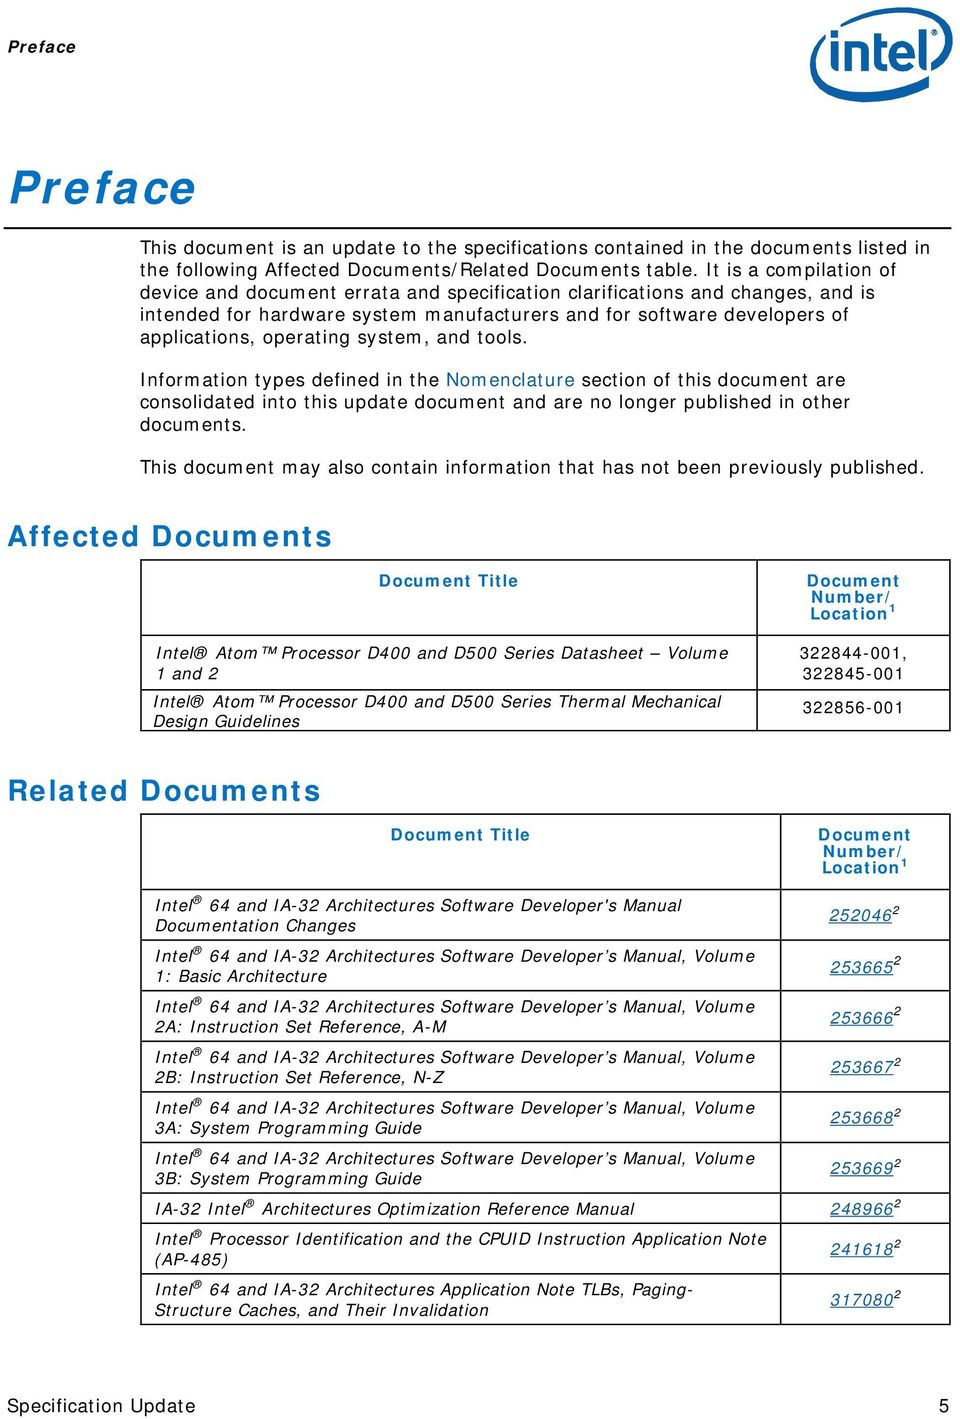 operating system, and tools. Information types defined in the Nomenclature section of this document are consolidated into this update document and are no longer published in other documents.